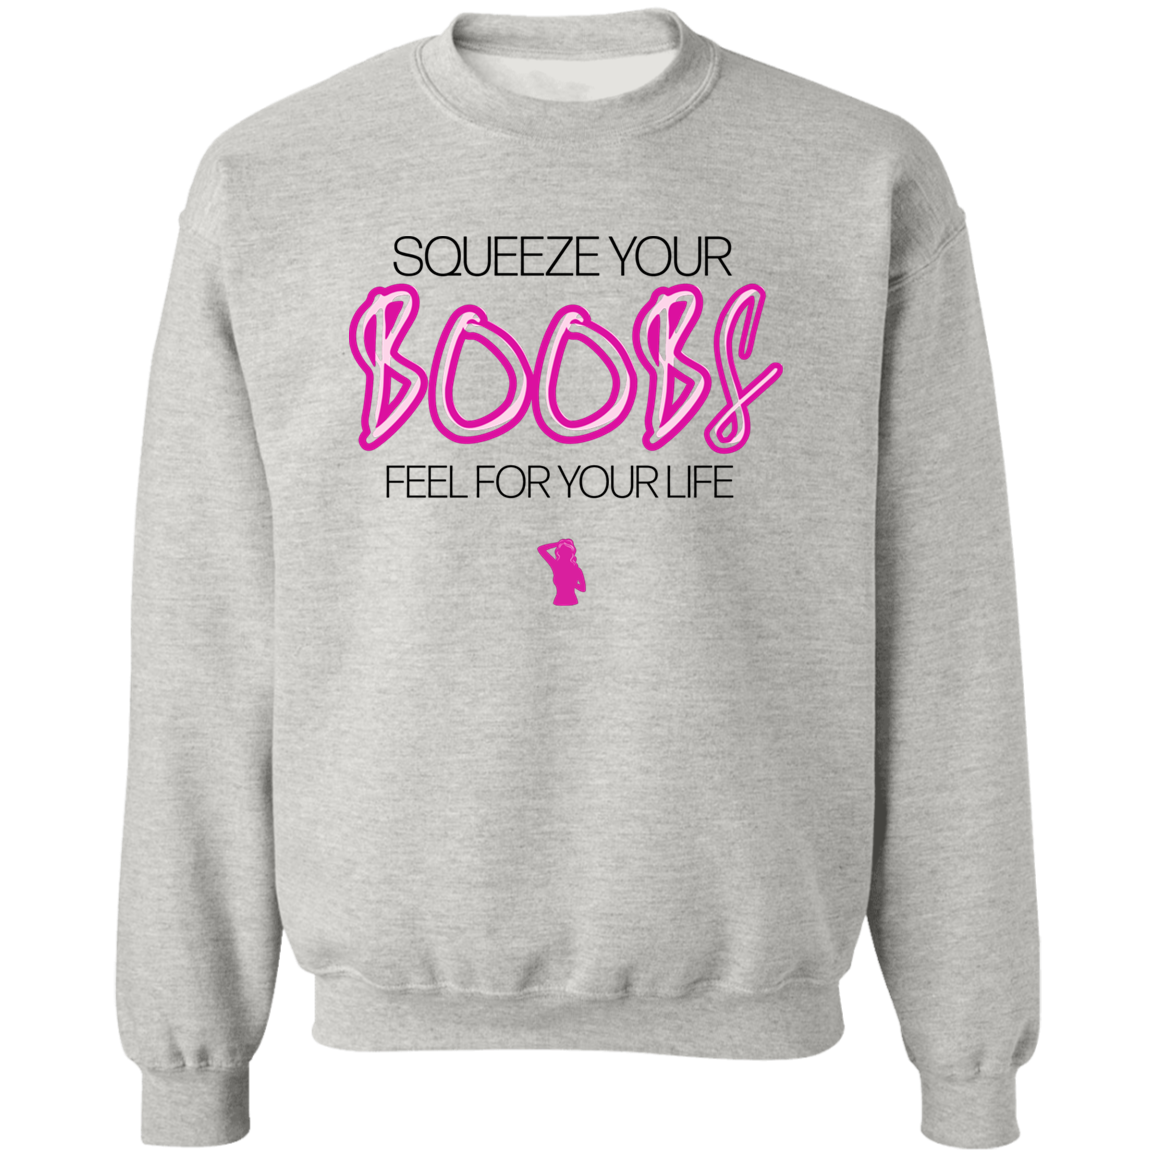 Squeeze Your Boobs Sweater Light Gray